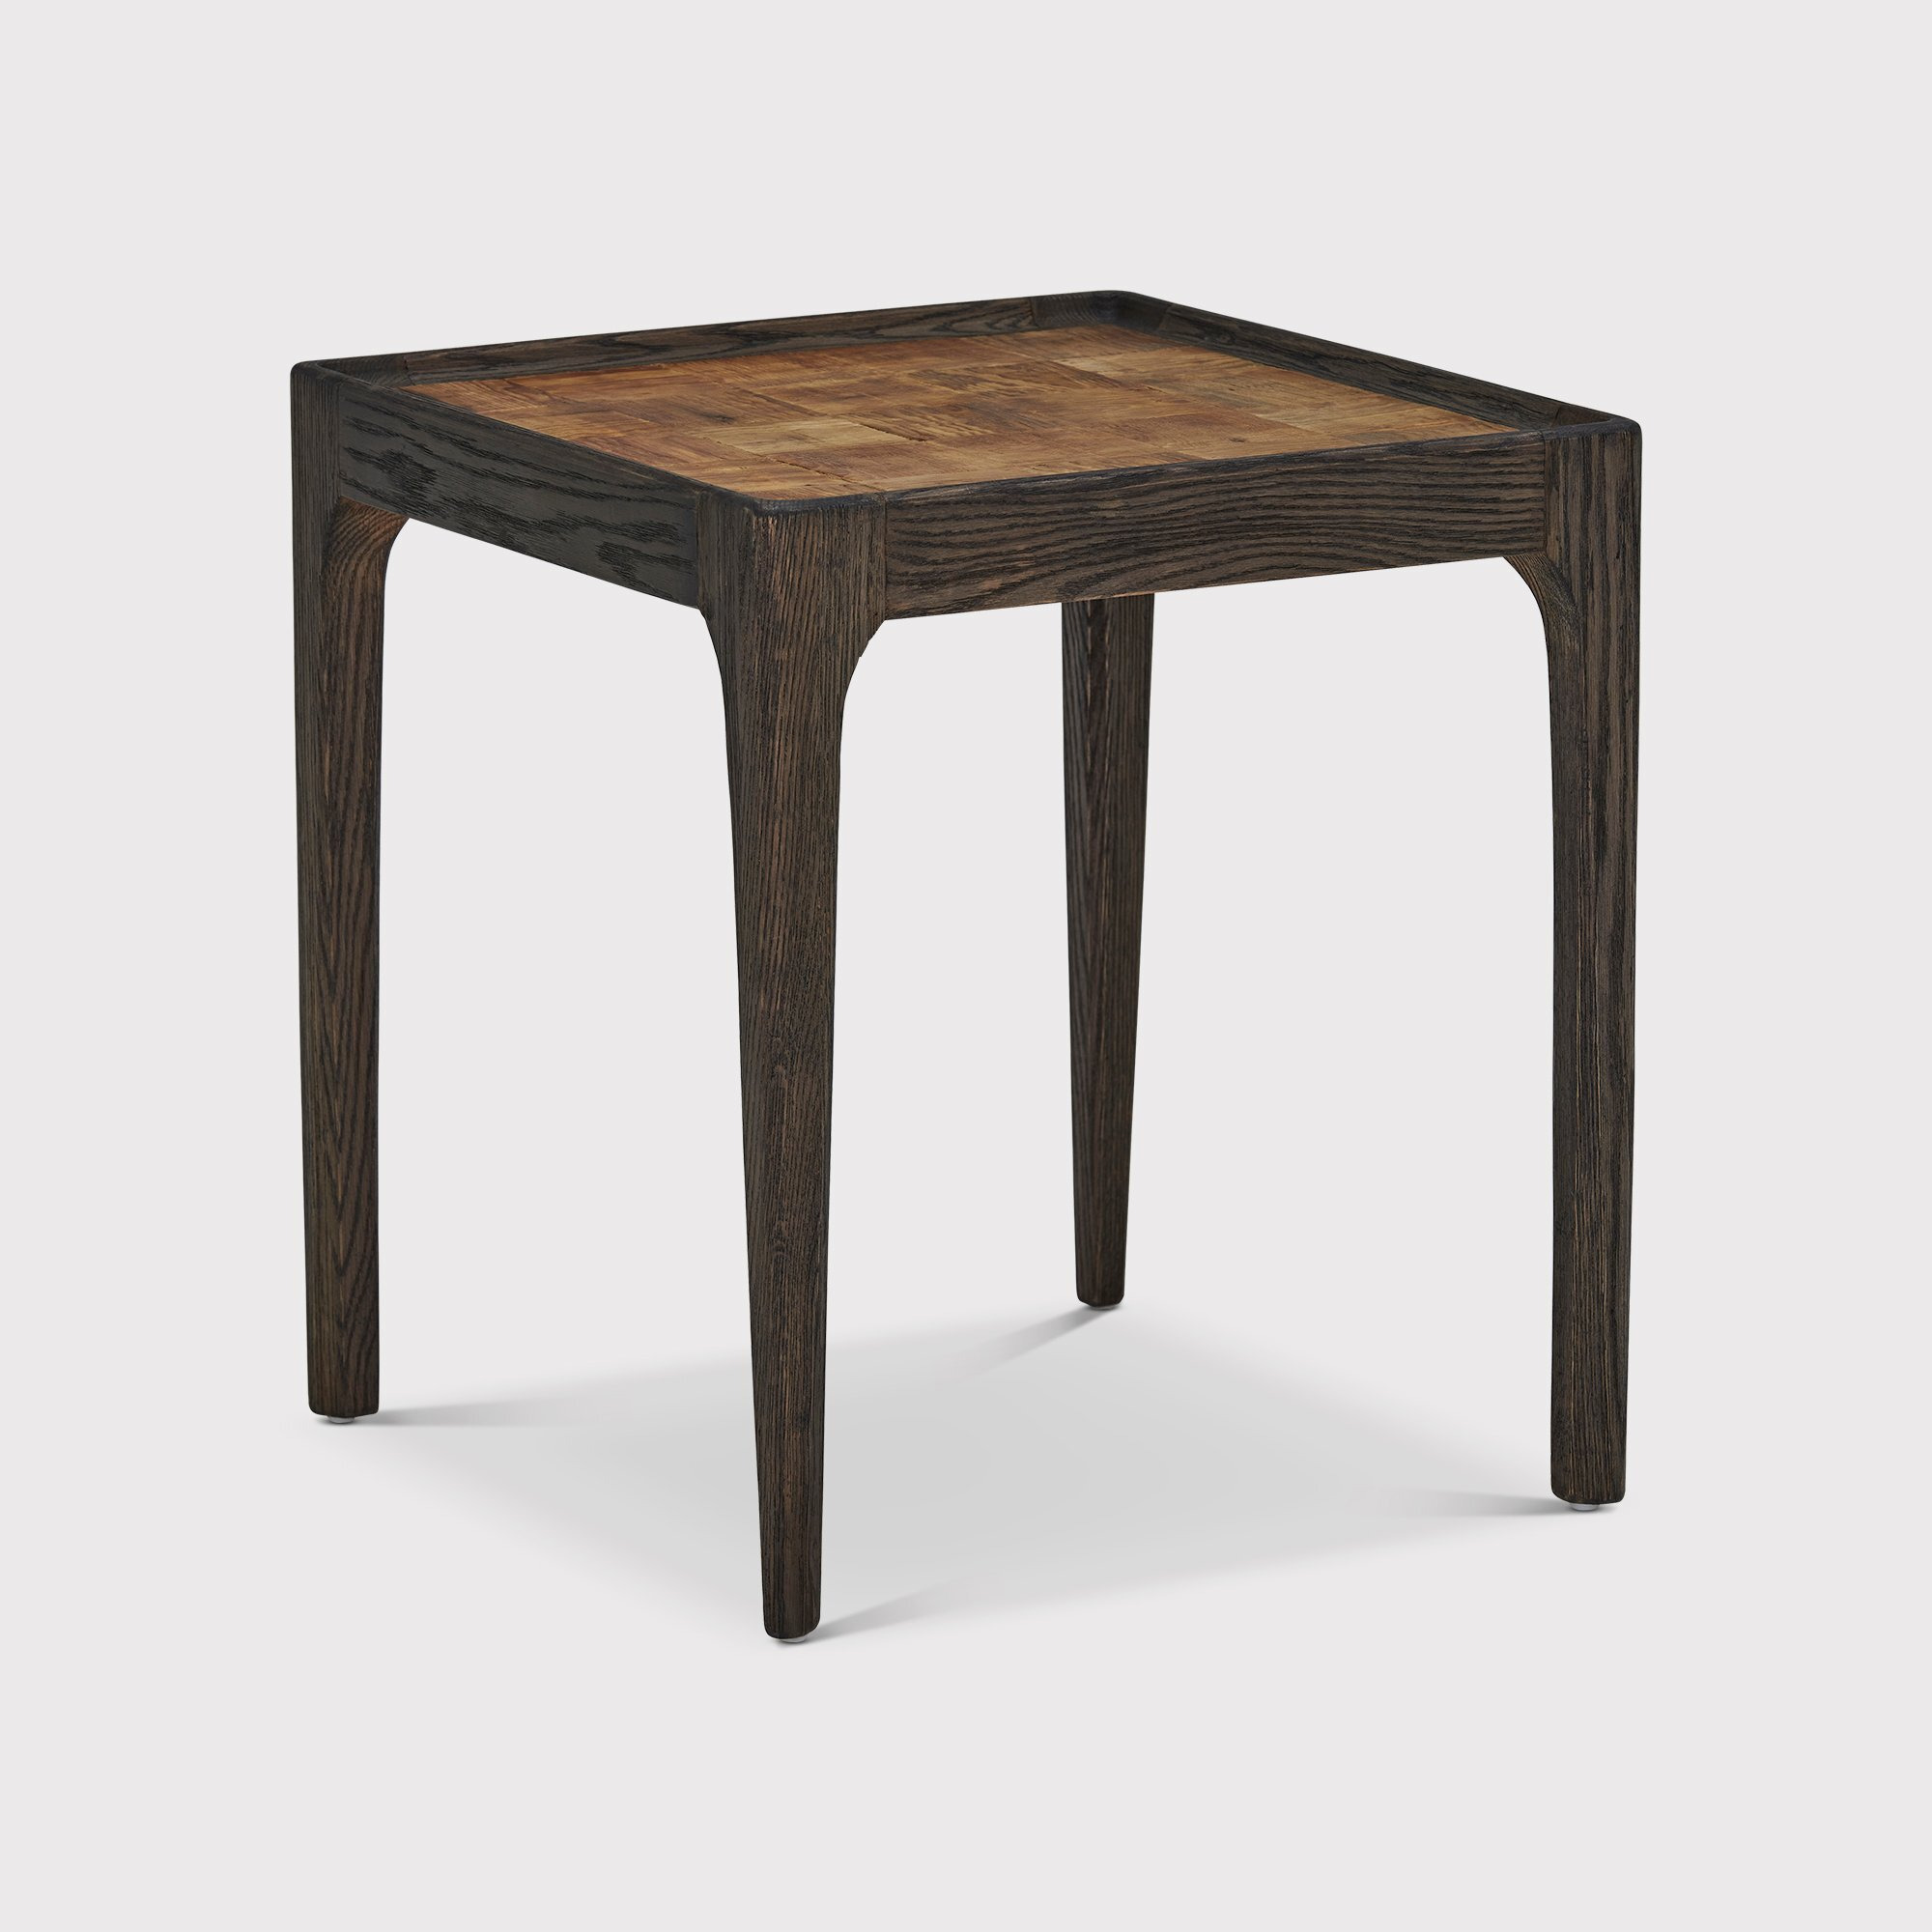 Jude Side Table With Inlay, Brown Oak - Barker & Stonehouse - image 1